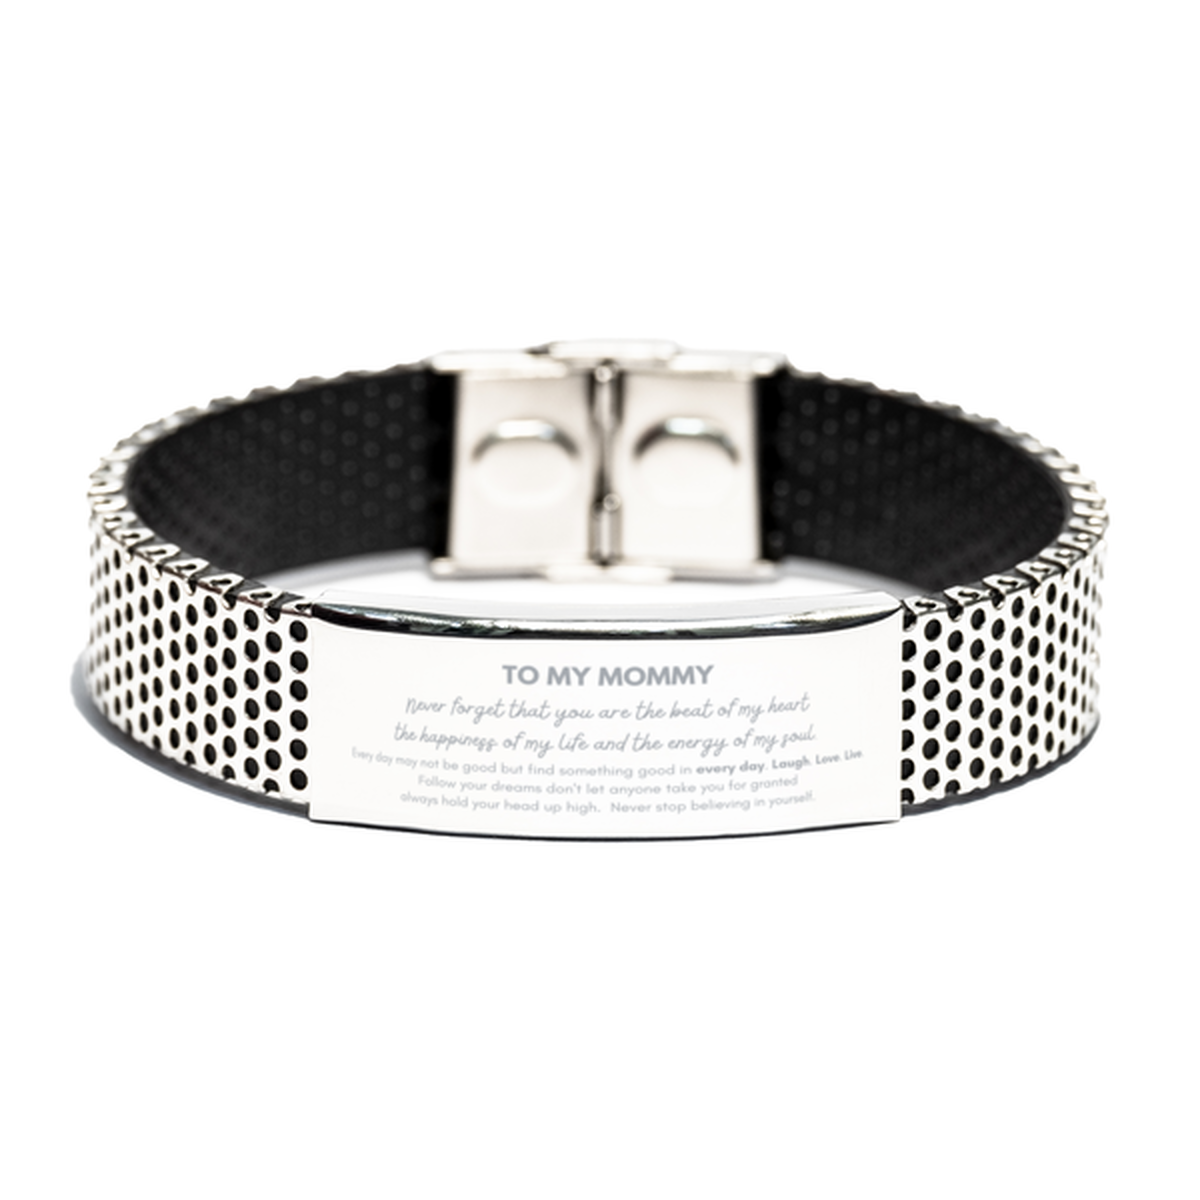 To My Mommy Bracelet Gifts, Christmas Mommy Stainless Steel Bracelet Present, Birthday Unique Motivational For Mommy, To My Mommy Never forget that you are the beat of my heart the happiness of my life and the energy of my soul